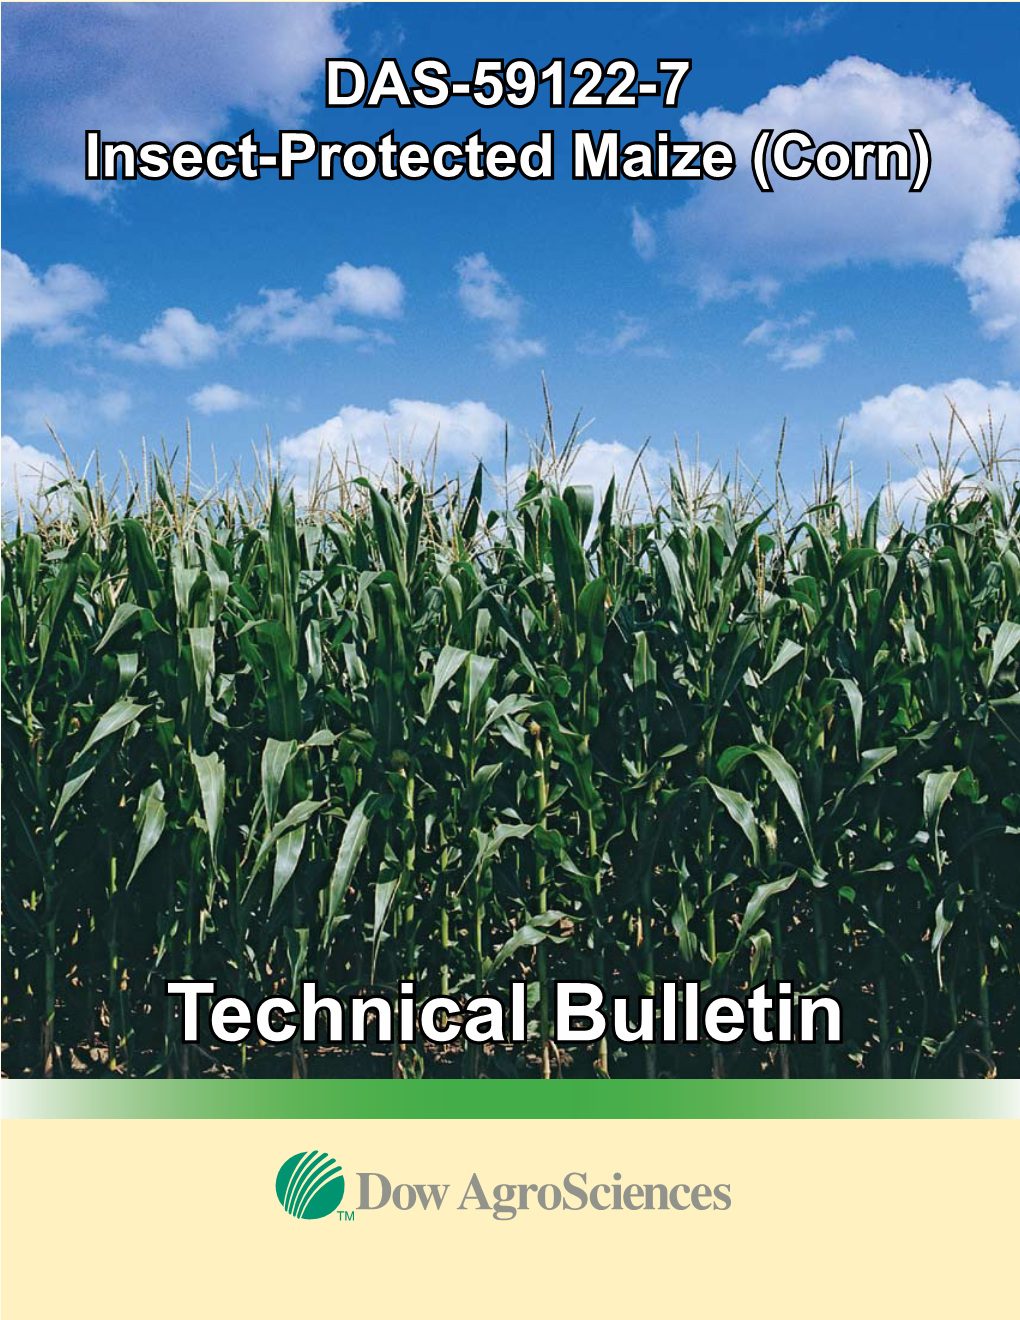 DAS-59122-7 Insect-Protected Maize (Corn)